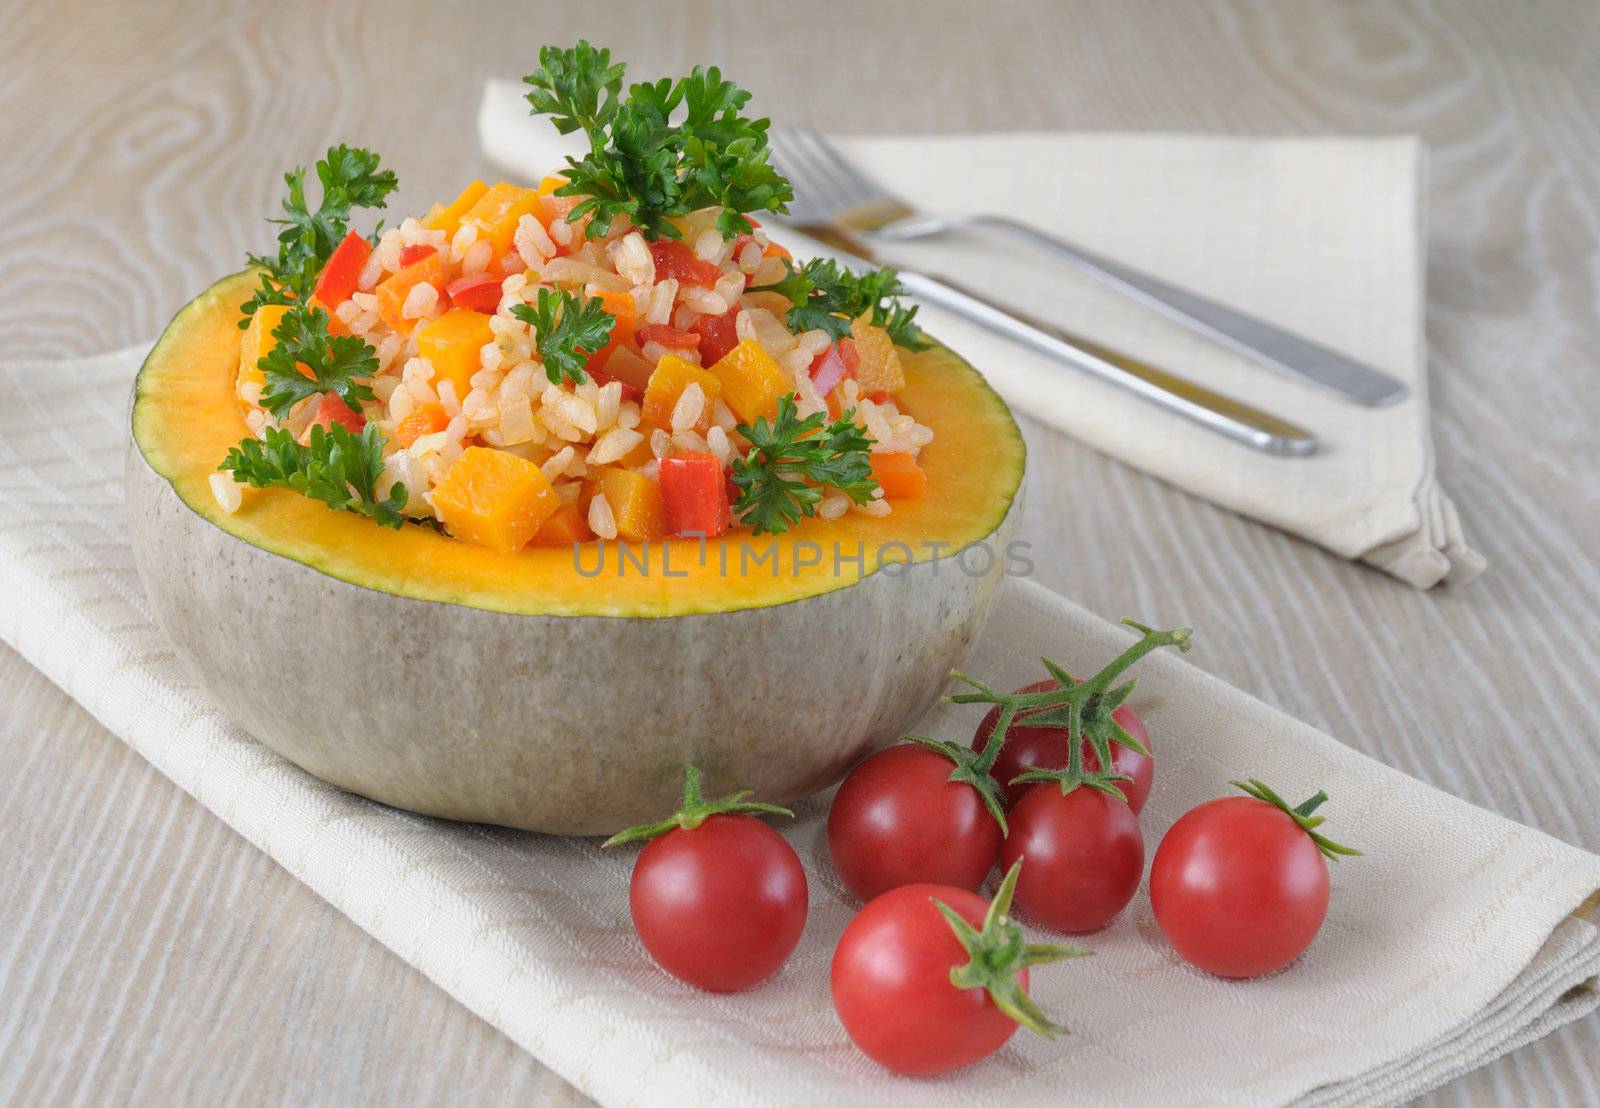 Rice porridge with pumpkin and vegetables in a bowl of pumpkin and tomatoes